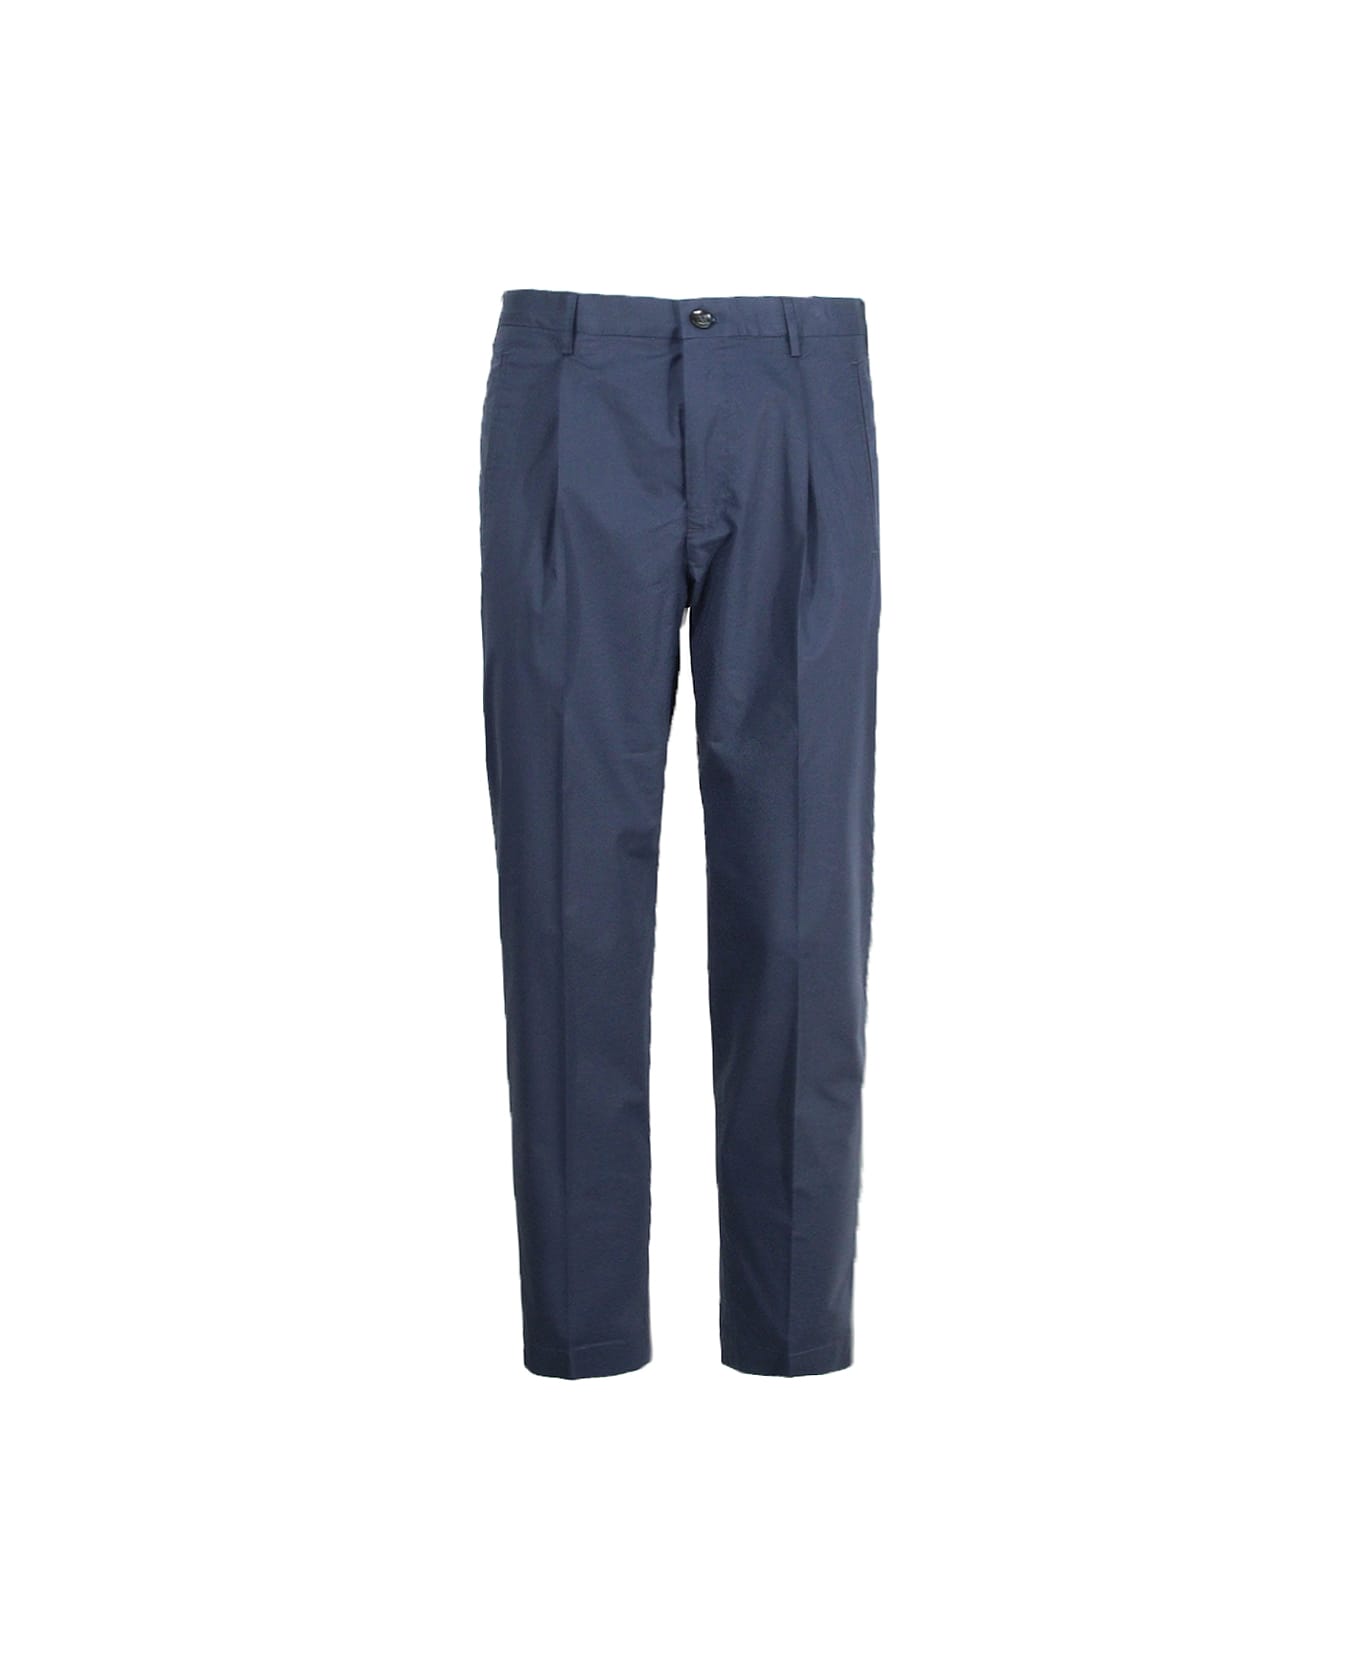 Incotex Trousers With Pleats - Blue ボトムス